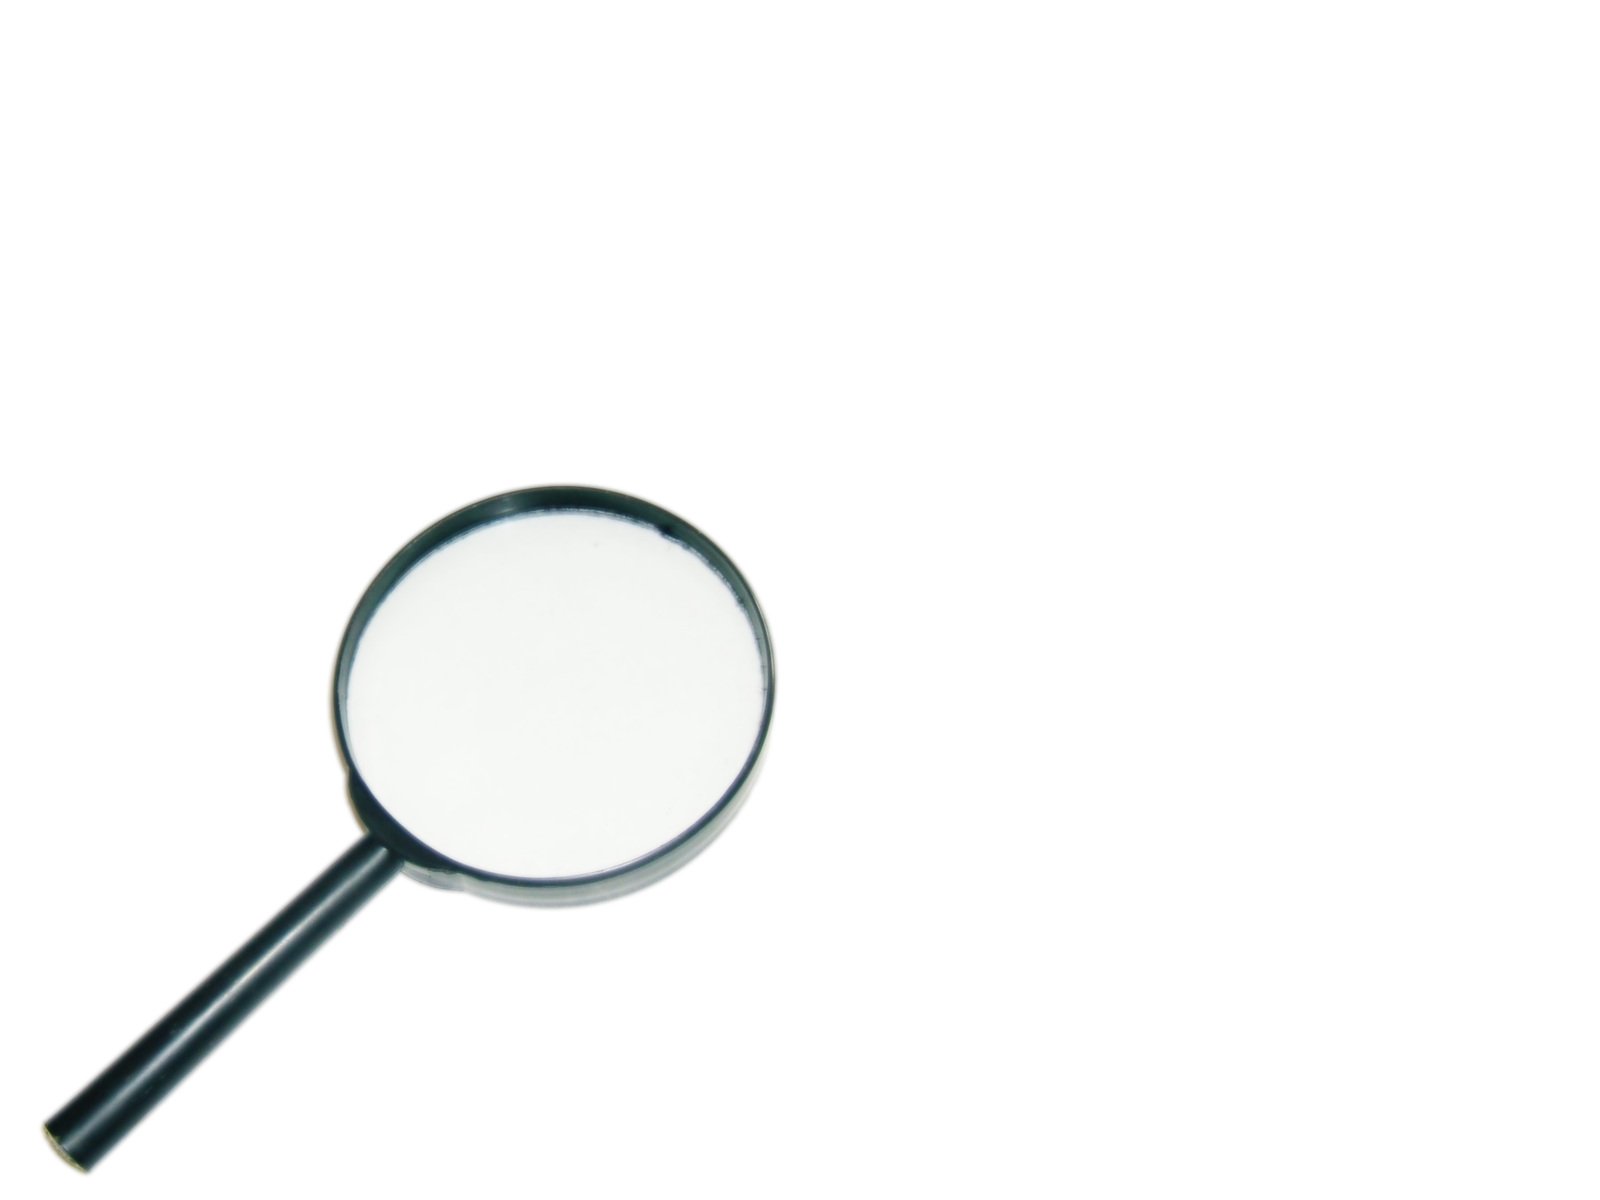 a magnifying glass that has a black handle on the side